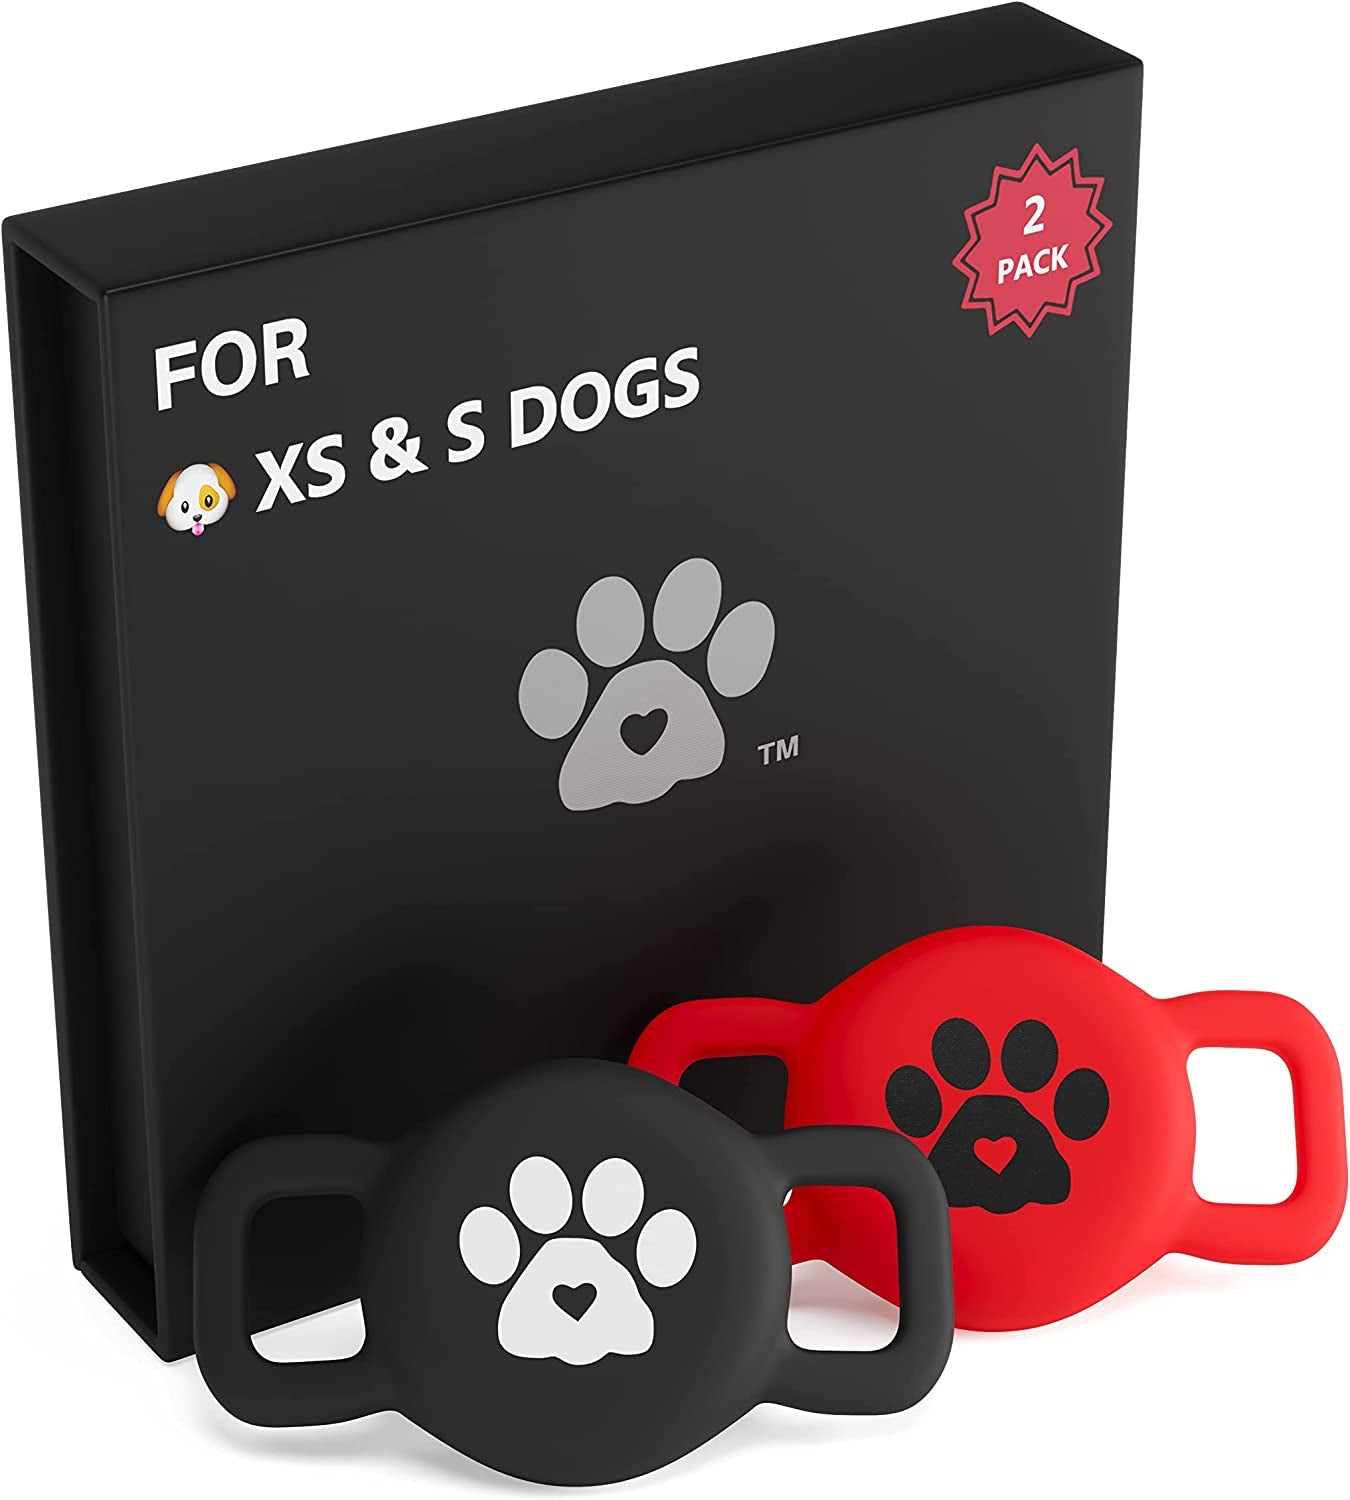 Airtag Dog Collar Holder – Available in Several Colors & Sizes - 2 Pack Silicone Dog Airtag Holder - Premium Dog Collar Airtag Holder - Apple Airtag Dog Collar Comfortably Fits Dogs & Cats Too! Electronics > GPS Accessories > GPS Cases LUVKO FAMILY Small- Cat, XS & S Dog, Red & Black  